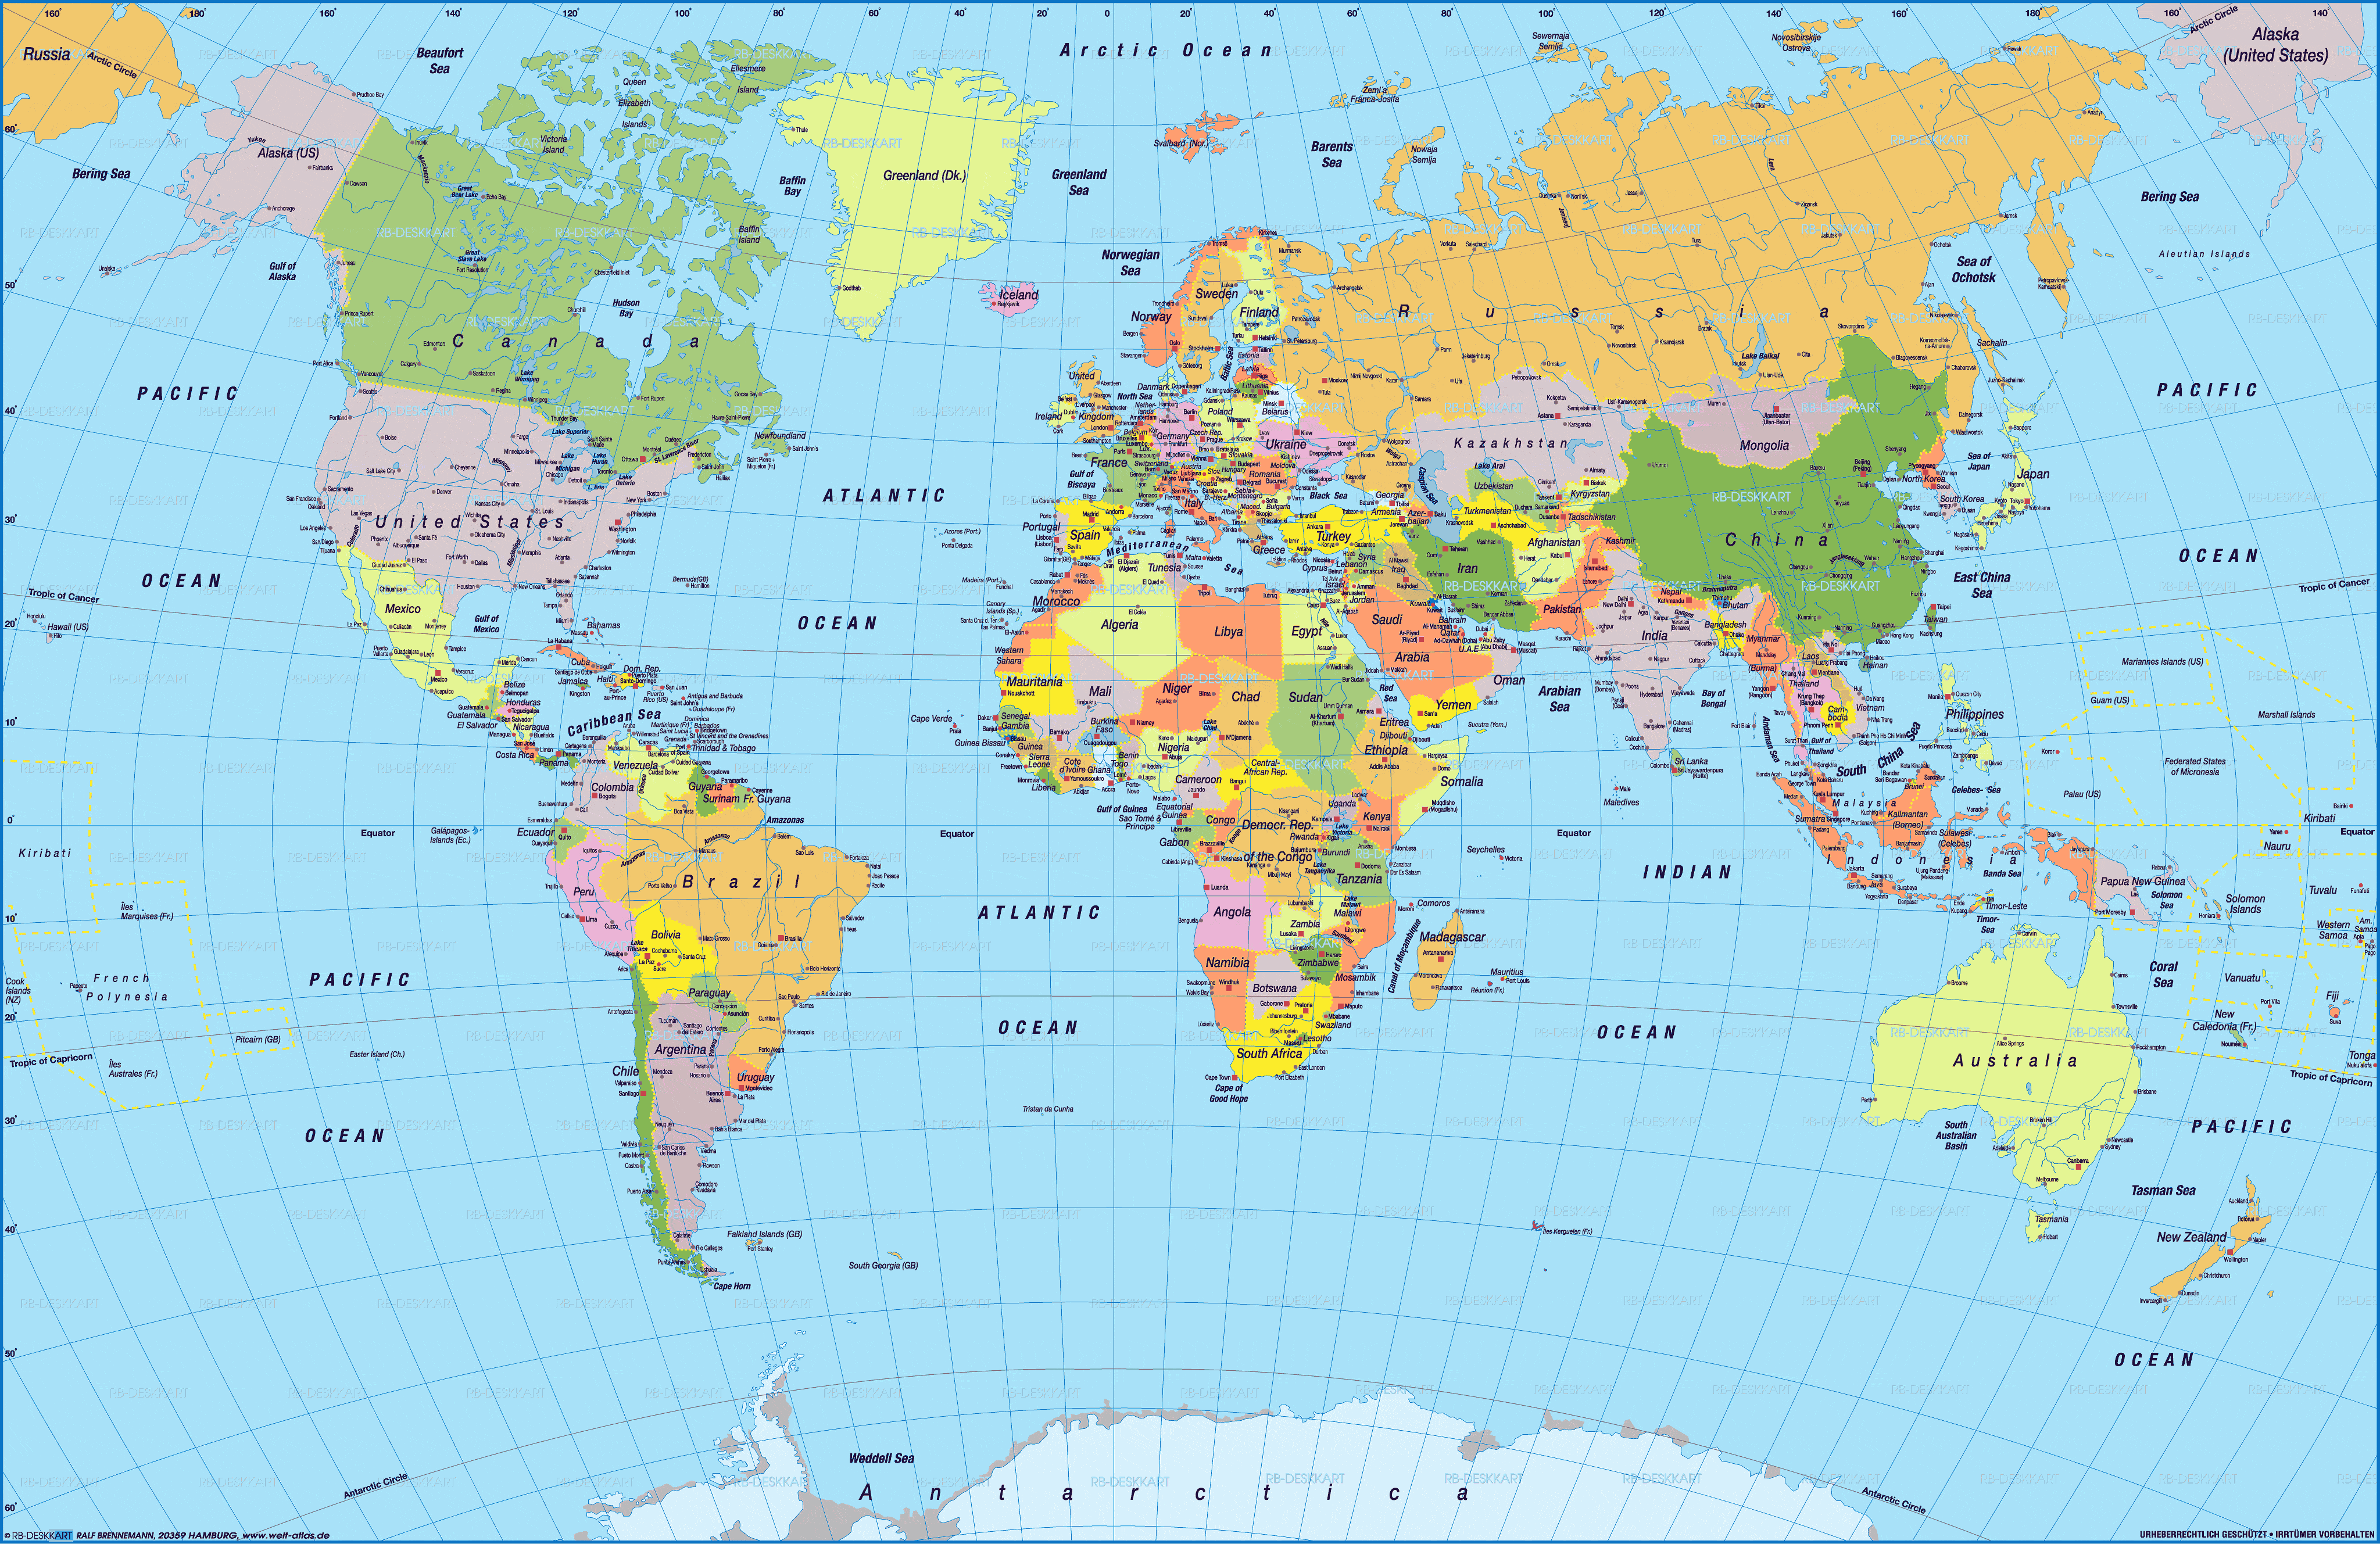 Political Map of the World - Guide of the World